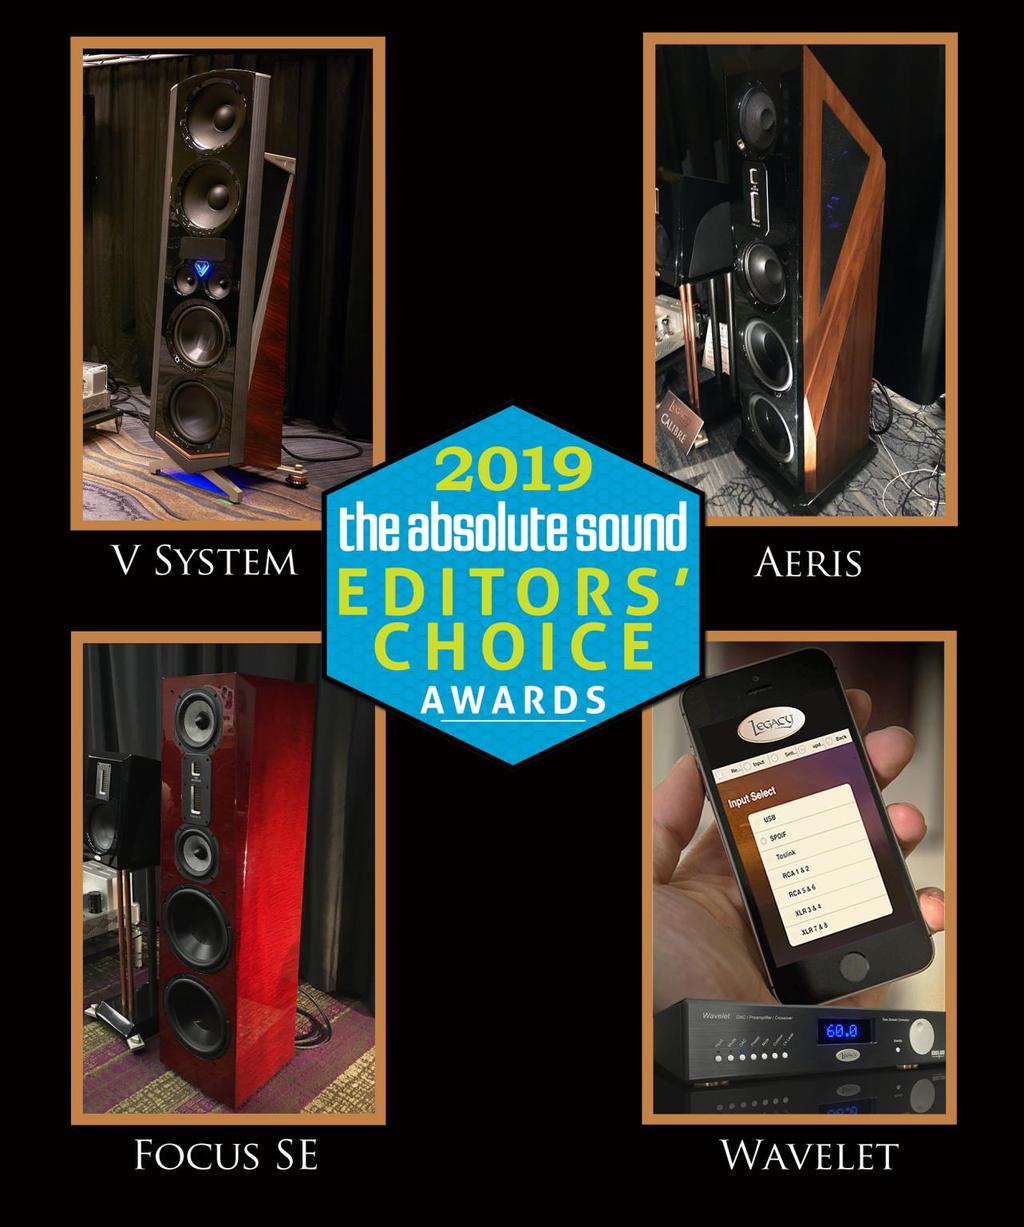 Happy 2019! We are thrilled to kick off the New Year with 3 Editors Choice Awards from The Absolute Sound for the V System with Wavelet, Aeris with Wavelet, and the Focus SE.